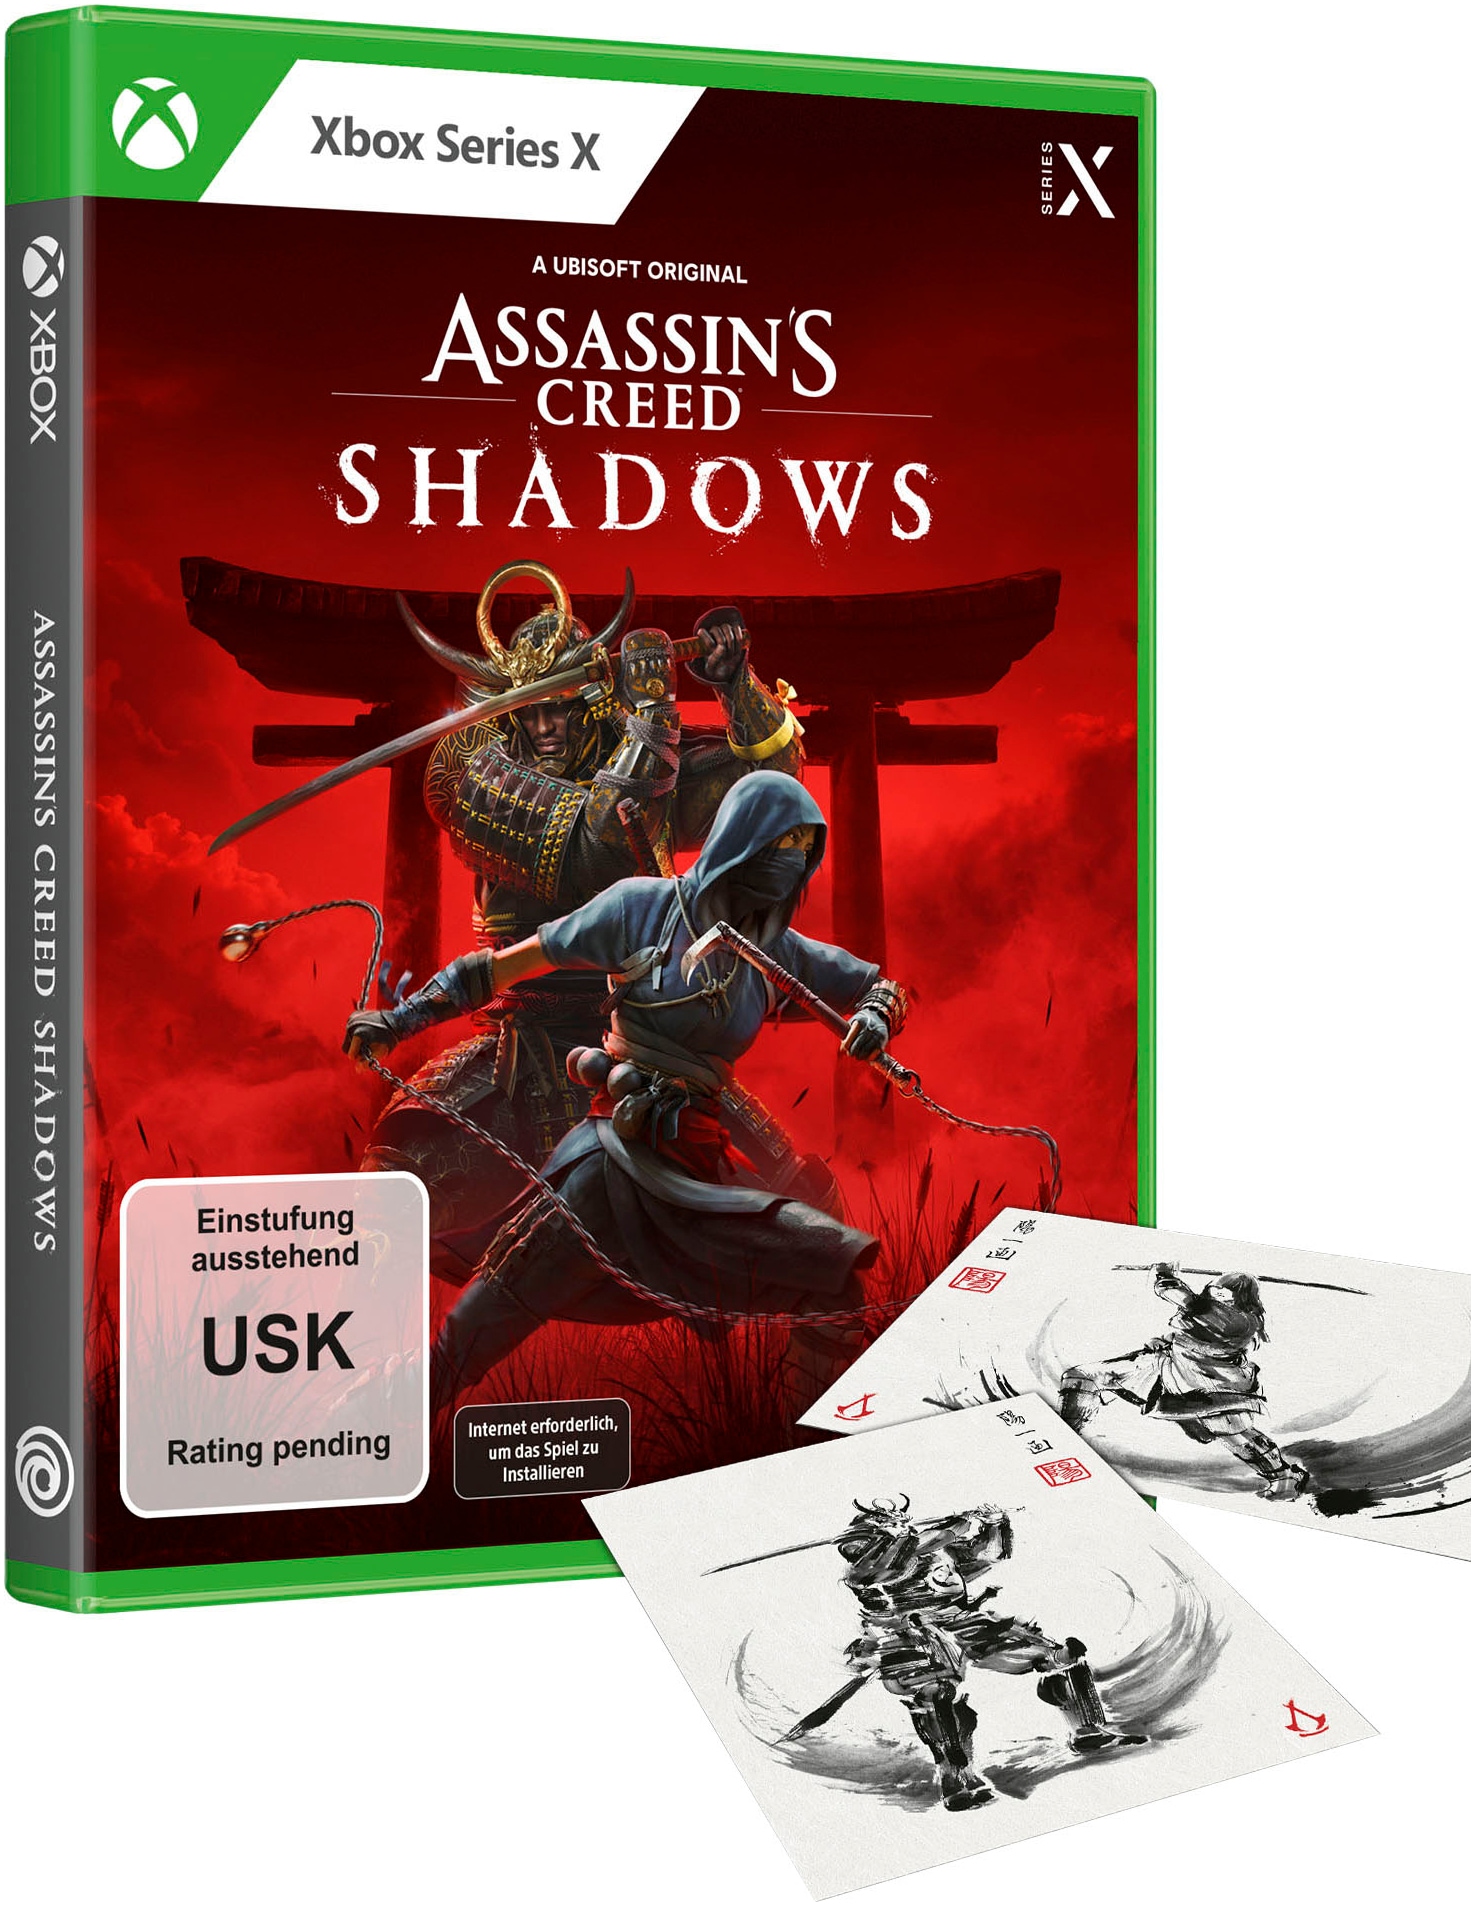 Spielesoftware »Assassin's Creed Shadows«, Xbox Series X